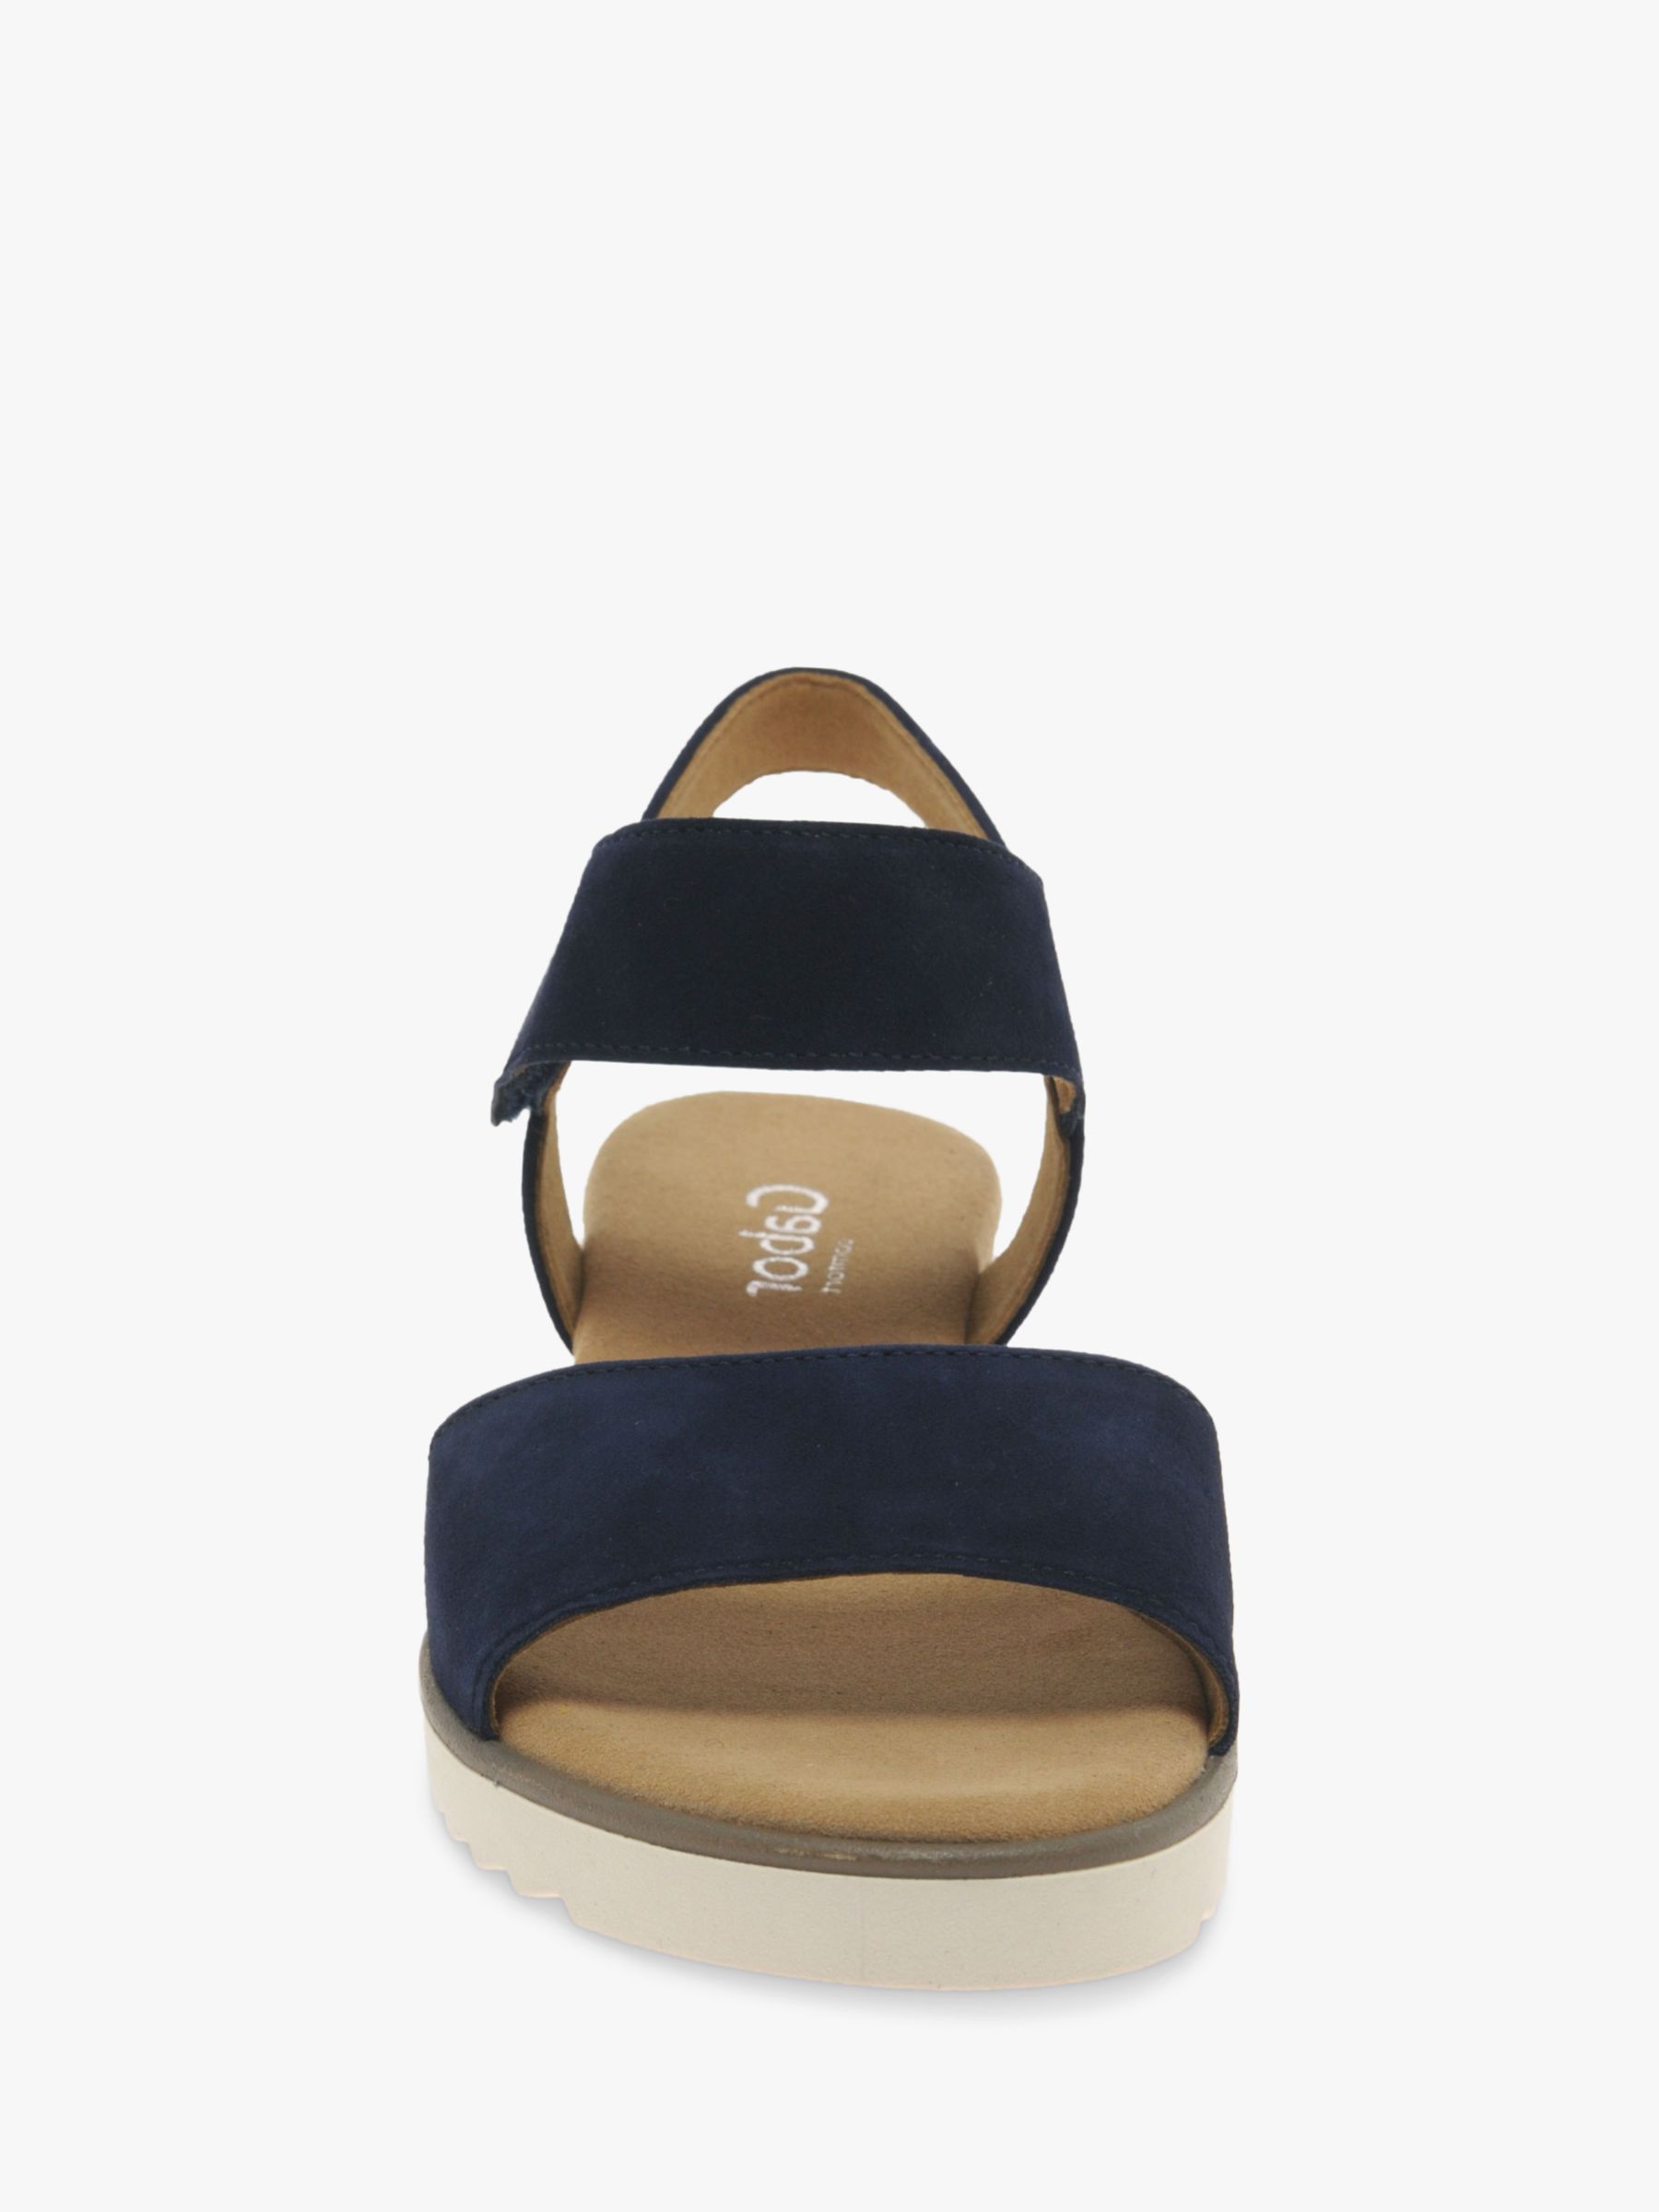 Gabor Raynor Suede Wide Fit Sandals, Blue at John Lewis & Partners